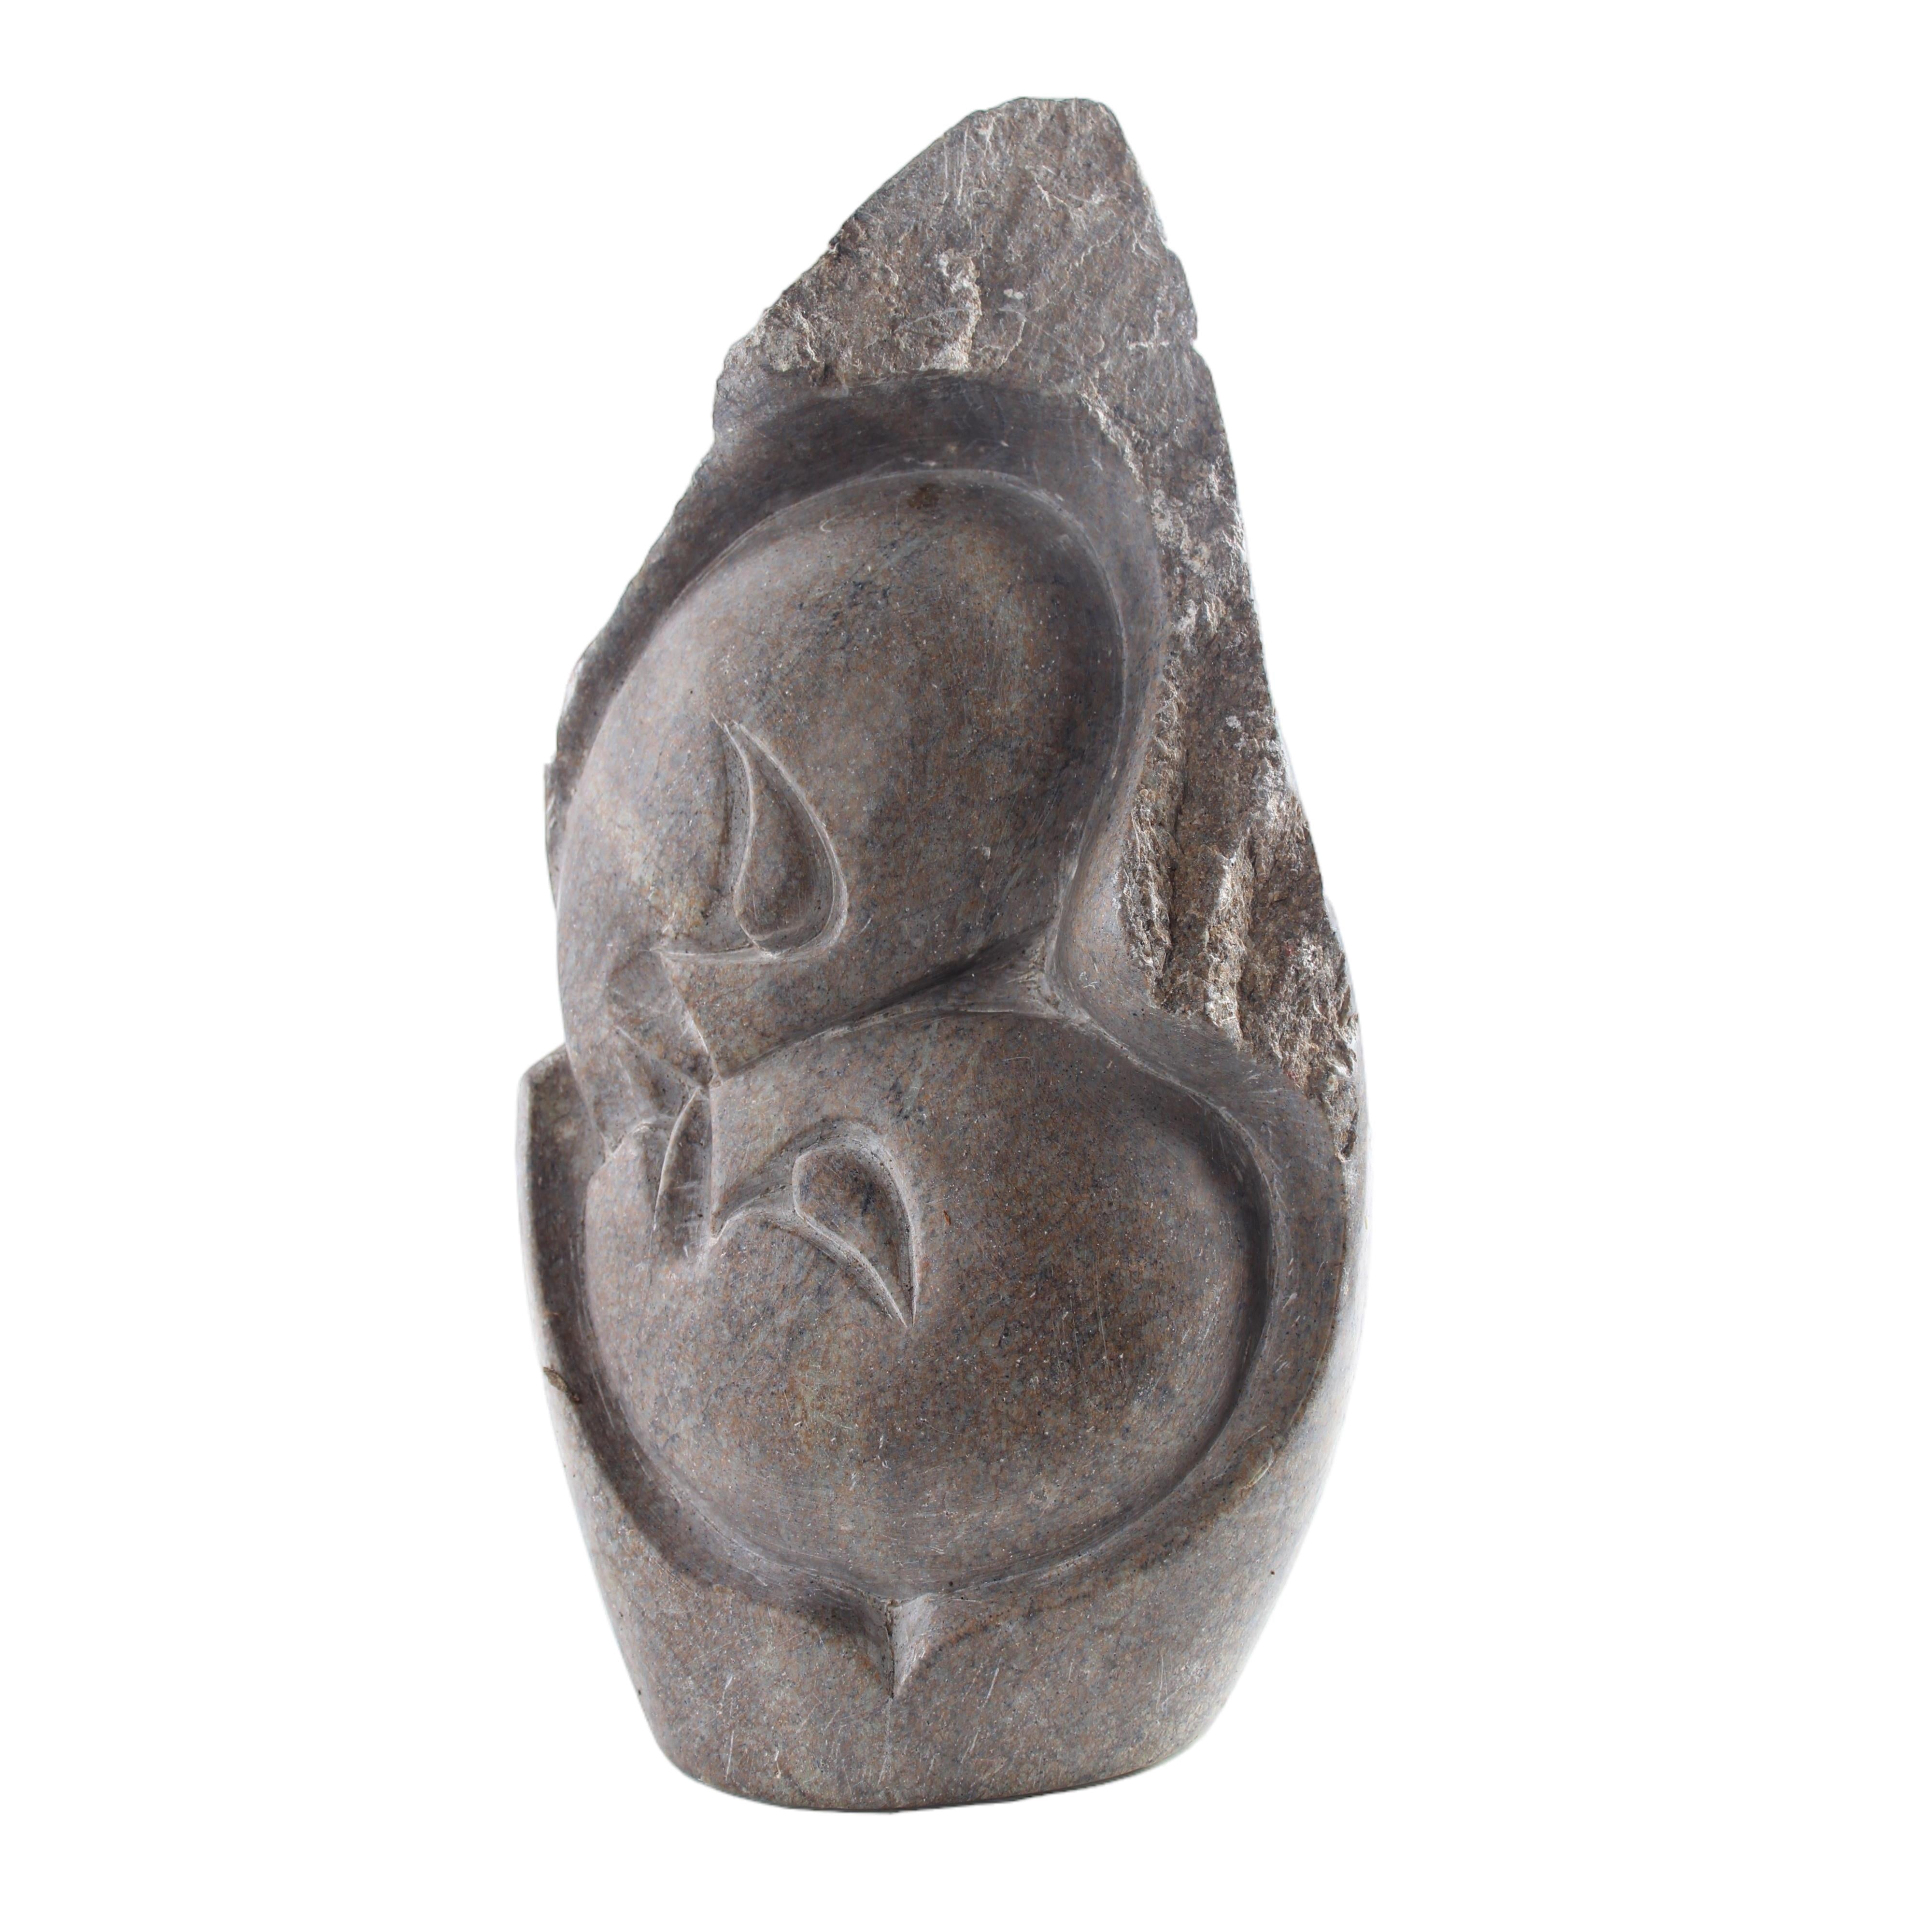 Shona Tribe Serpentine Stone Mother and Child ~12.6" Tall